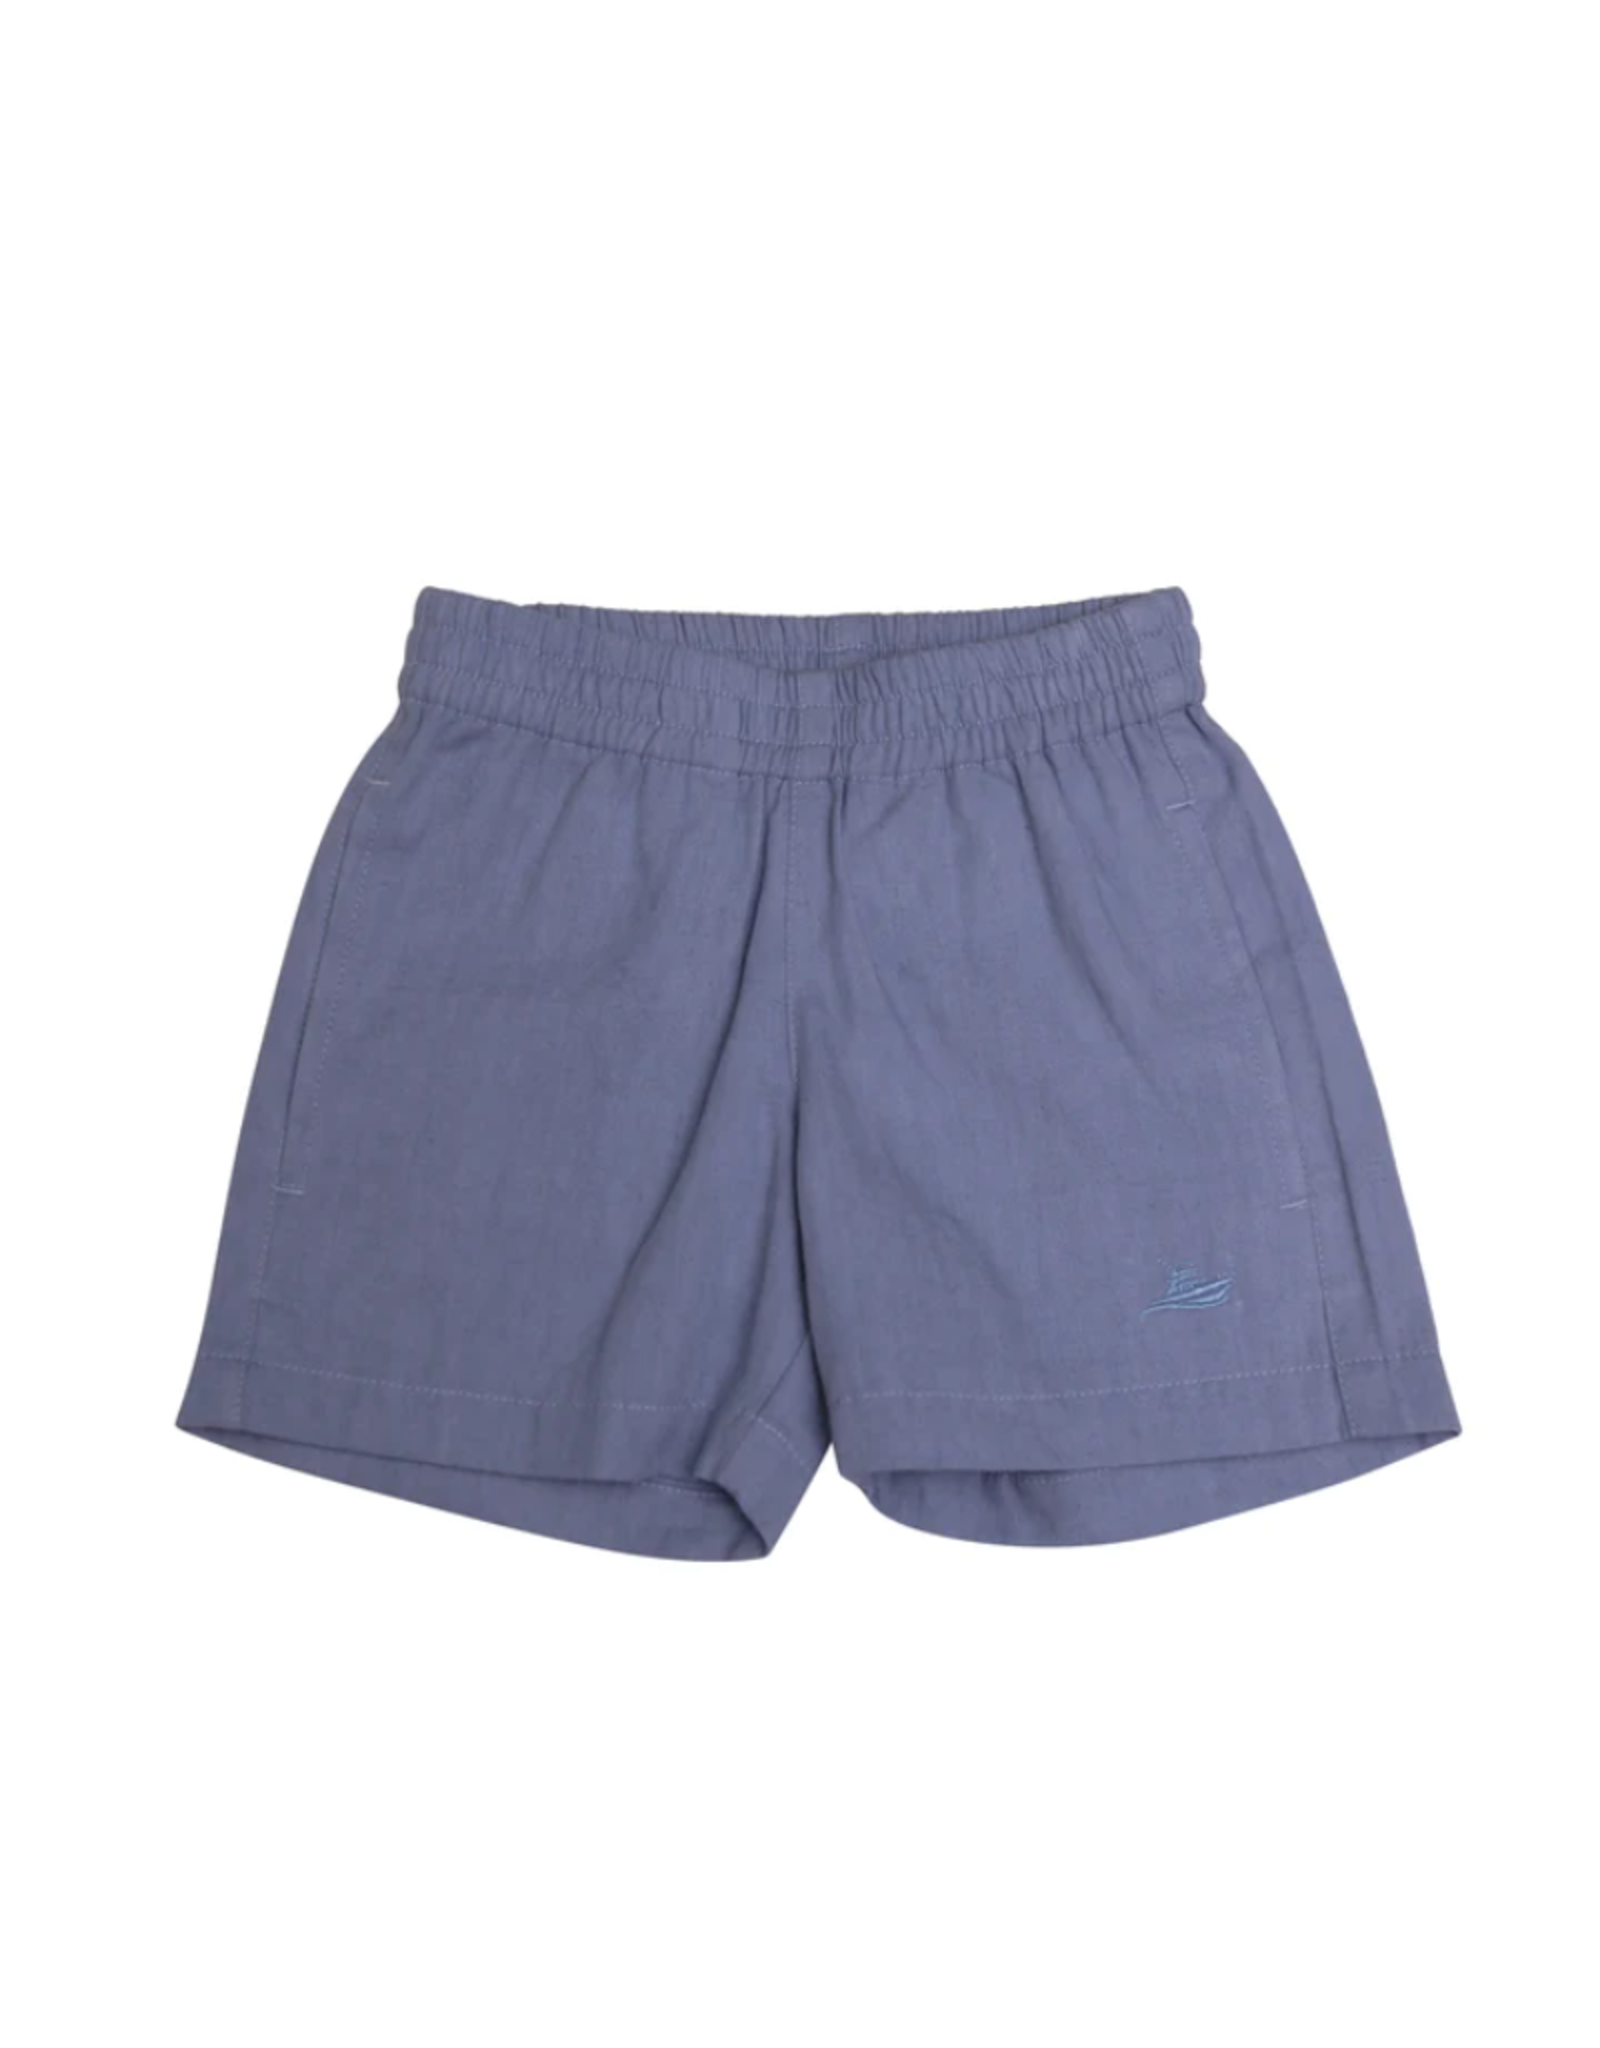 SouthBound Play Shorts Allure Blue